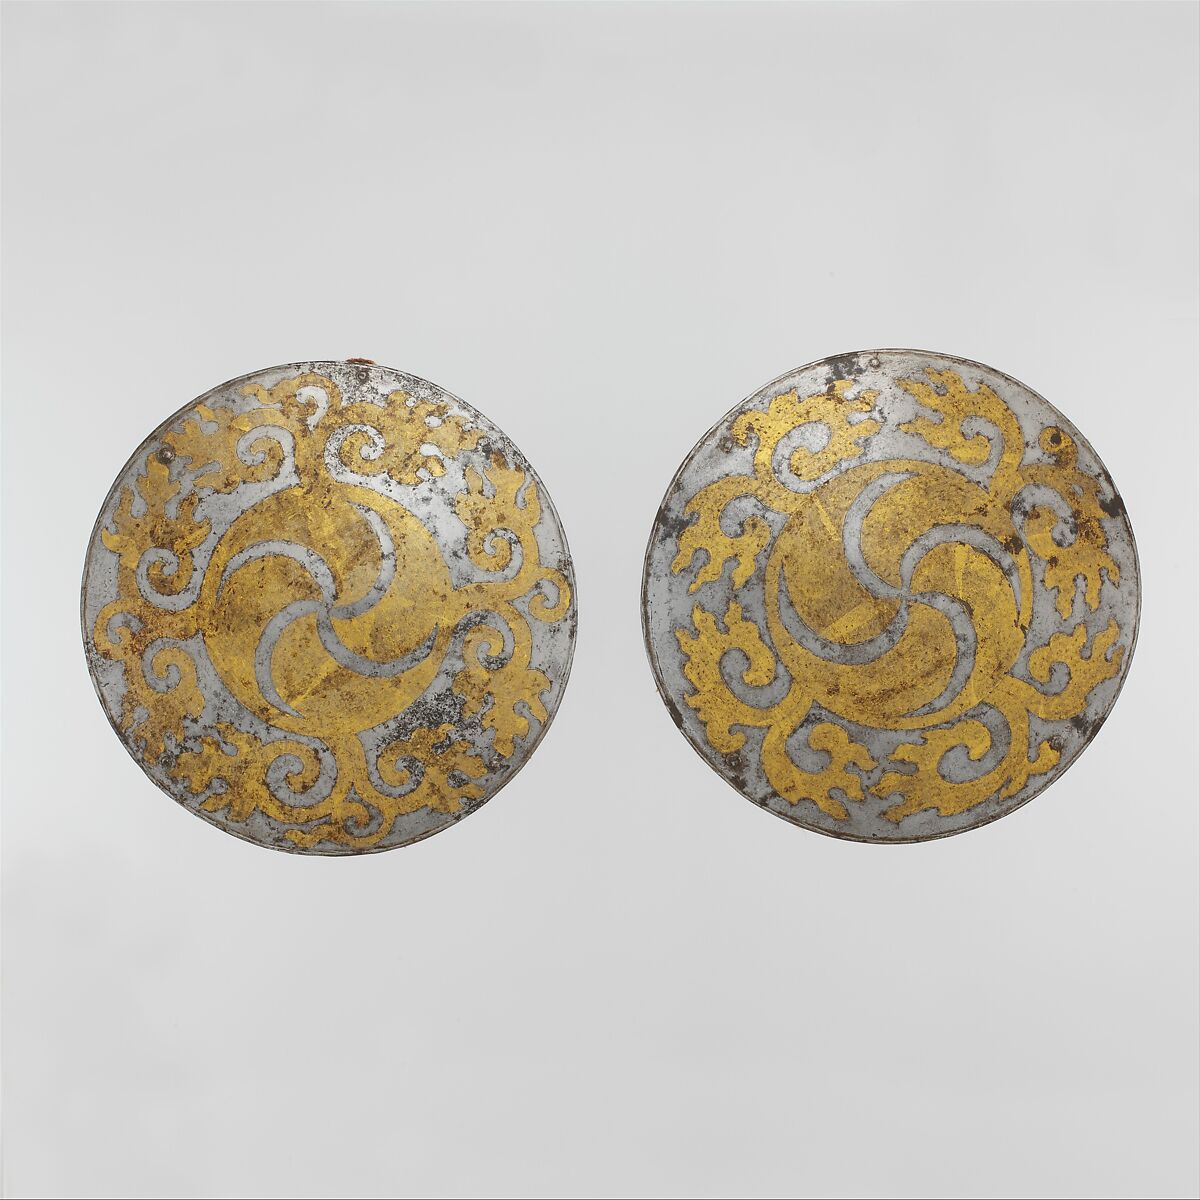 Breastplate and Backplate from a Set of "Four Mirrors", Iron, gold, leather, textile, probably Tibetan 